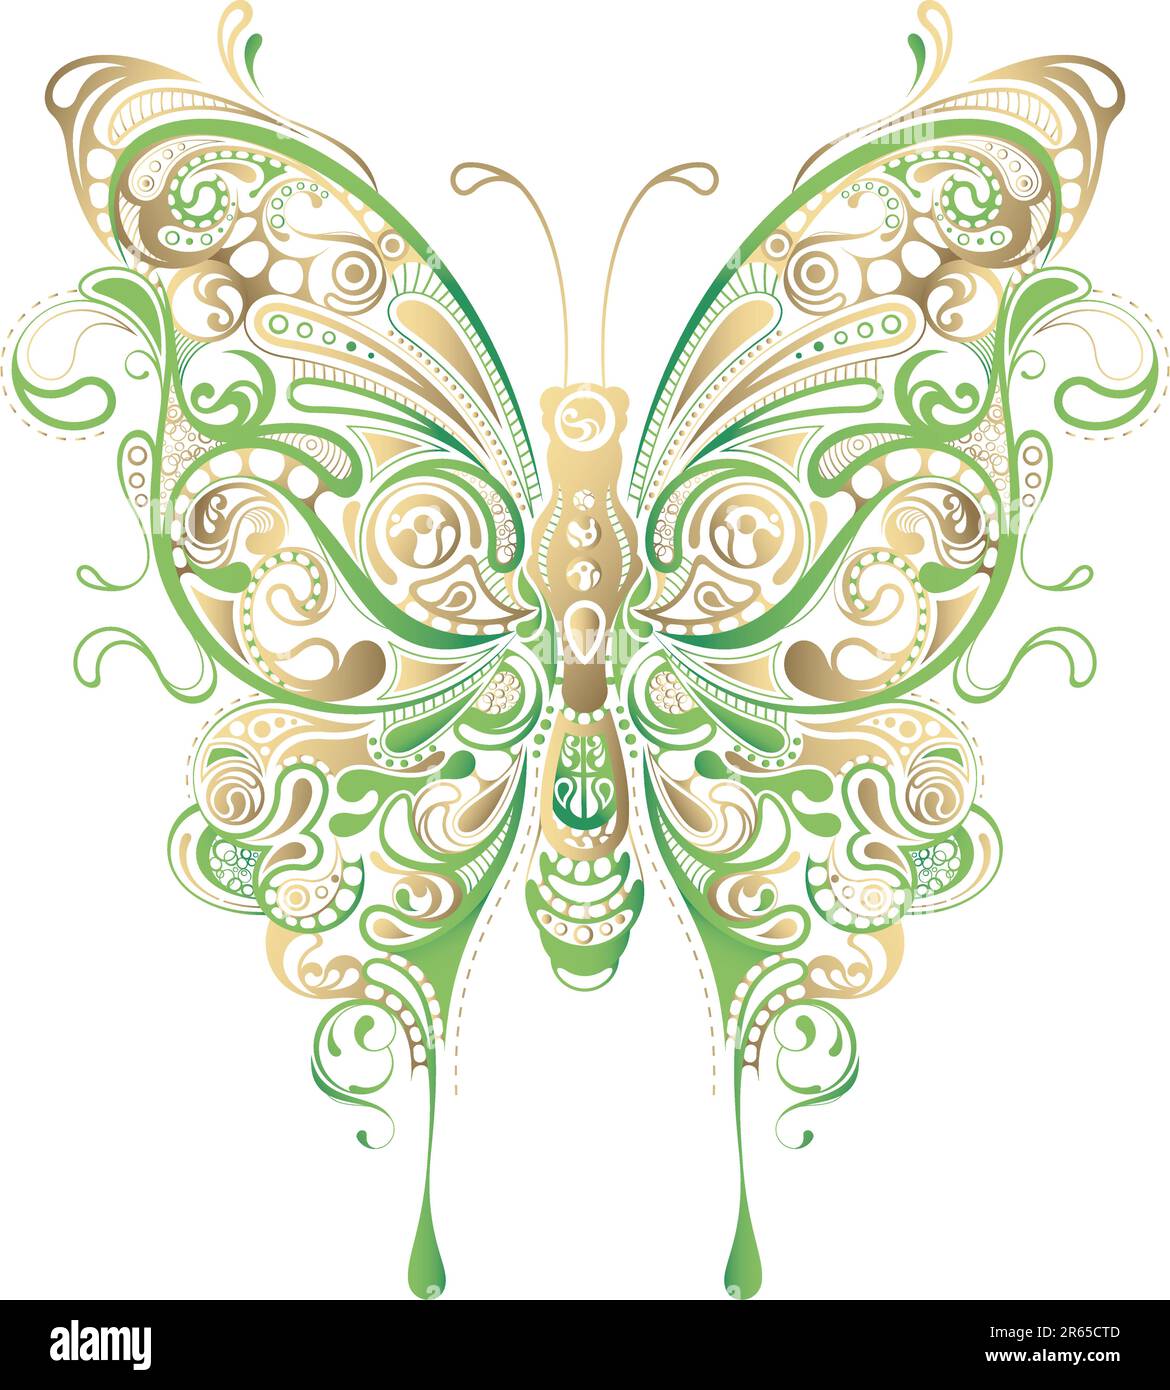 Illustration of abstract design butterfly. Stock Vector